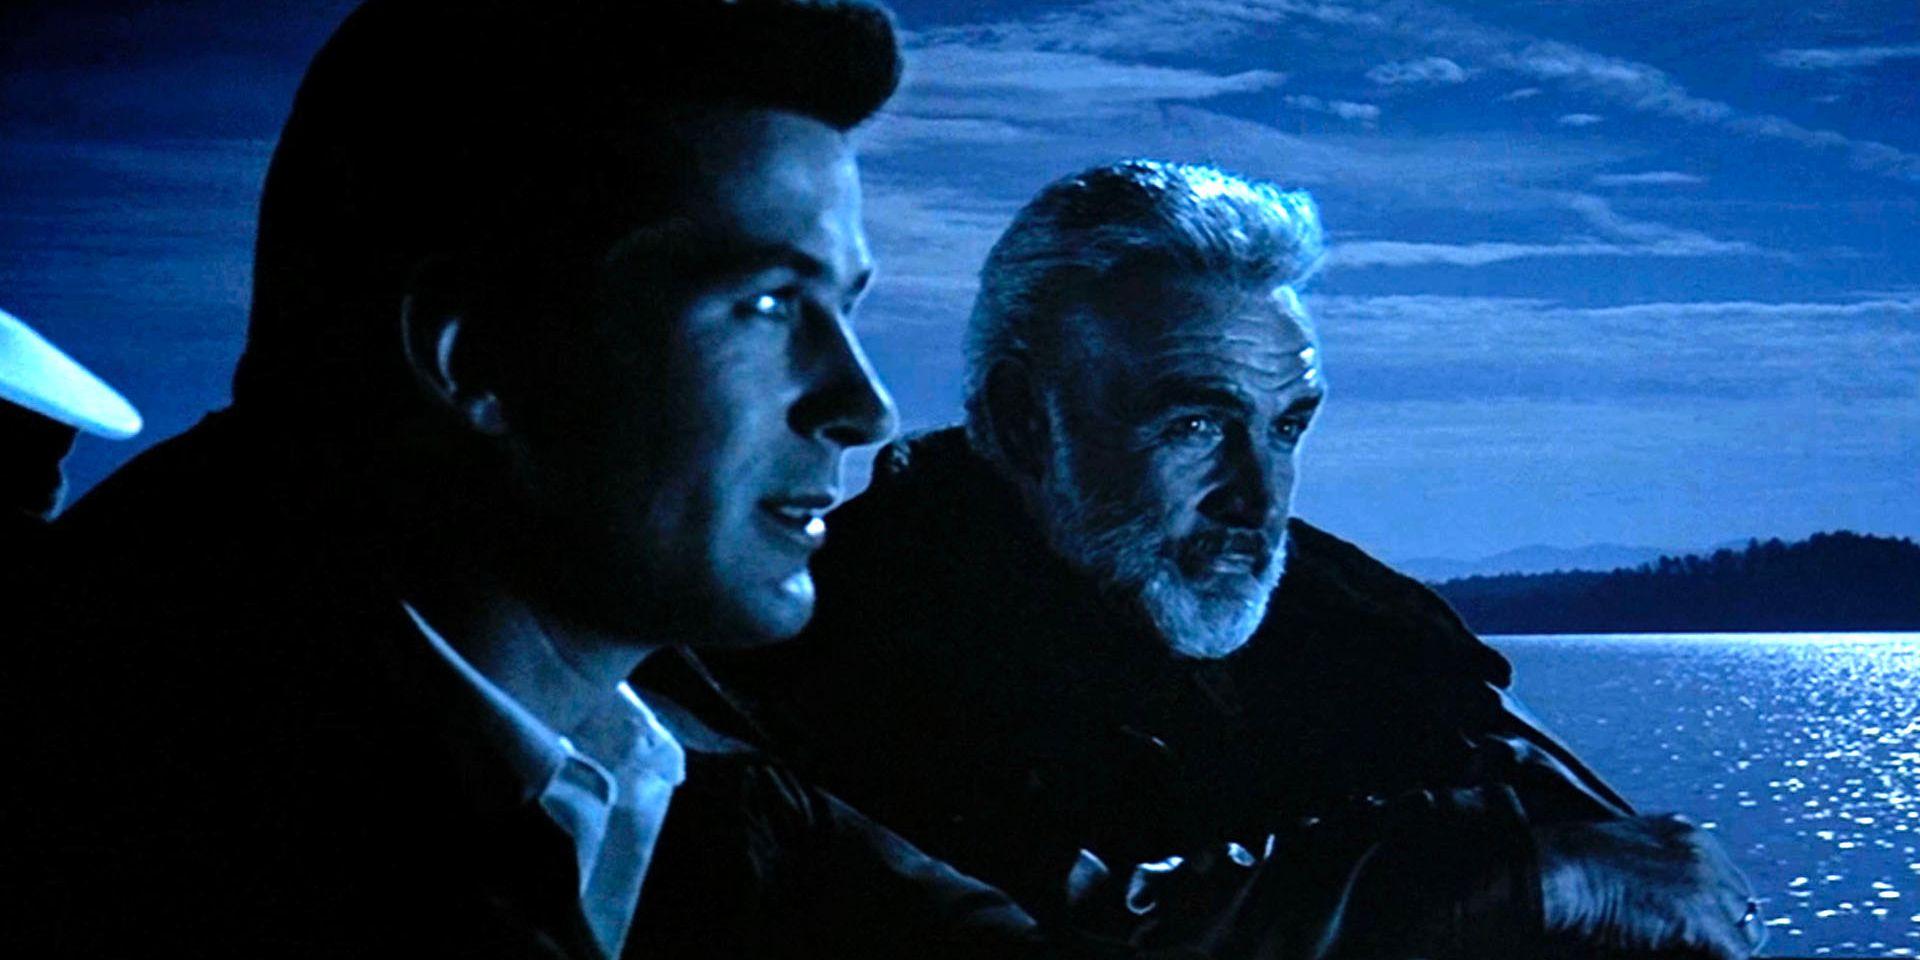 Alec Baldwin and Sean Connery in 'The Hunt For Red October' (1990).